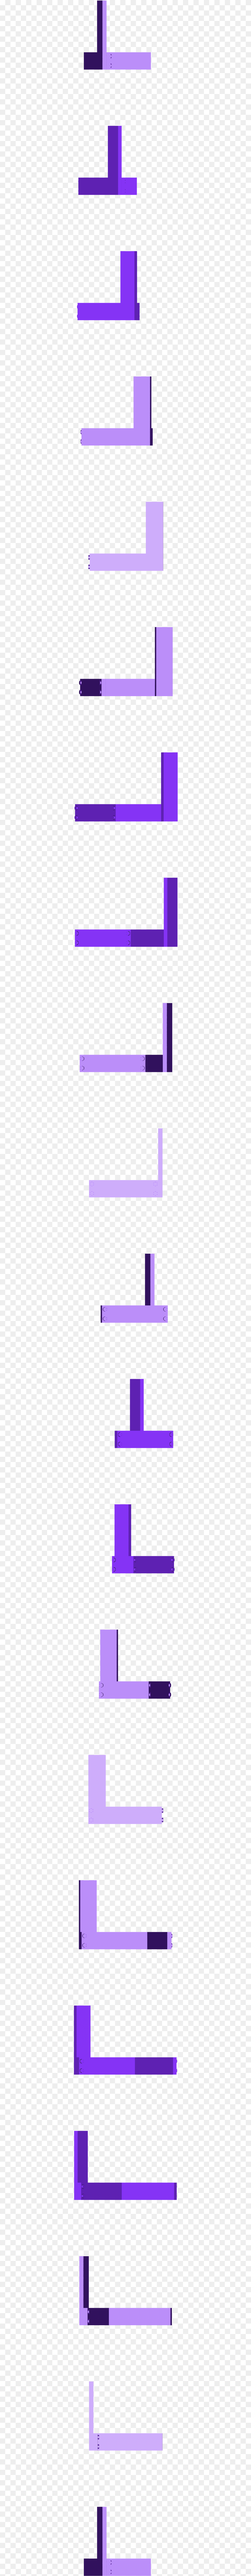 Impossible Triangle, Purple Free Transparent Png